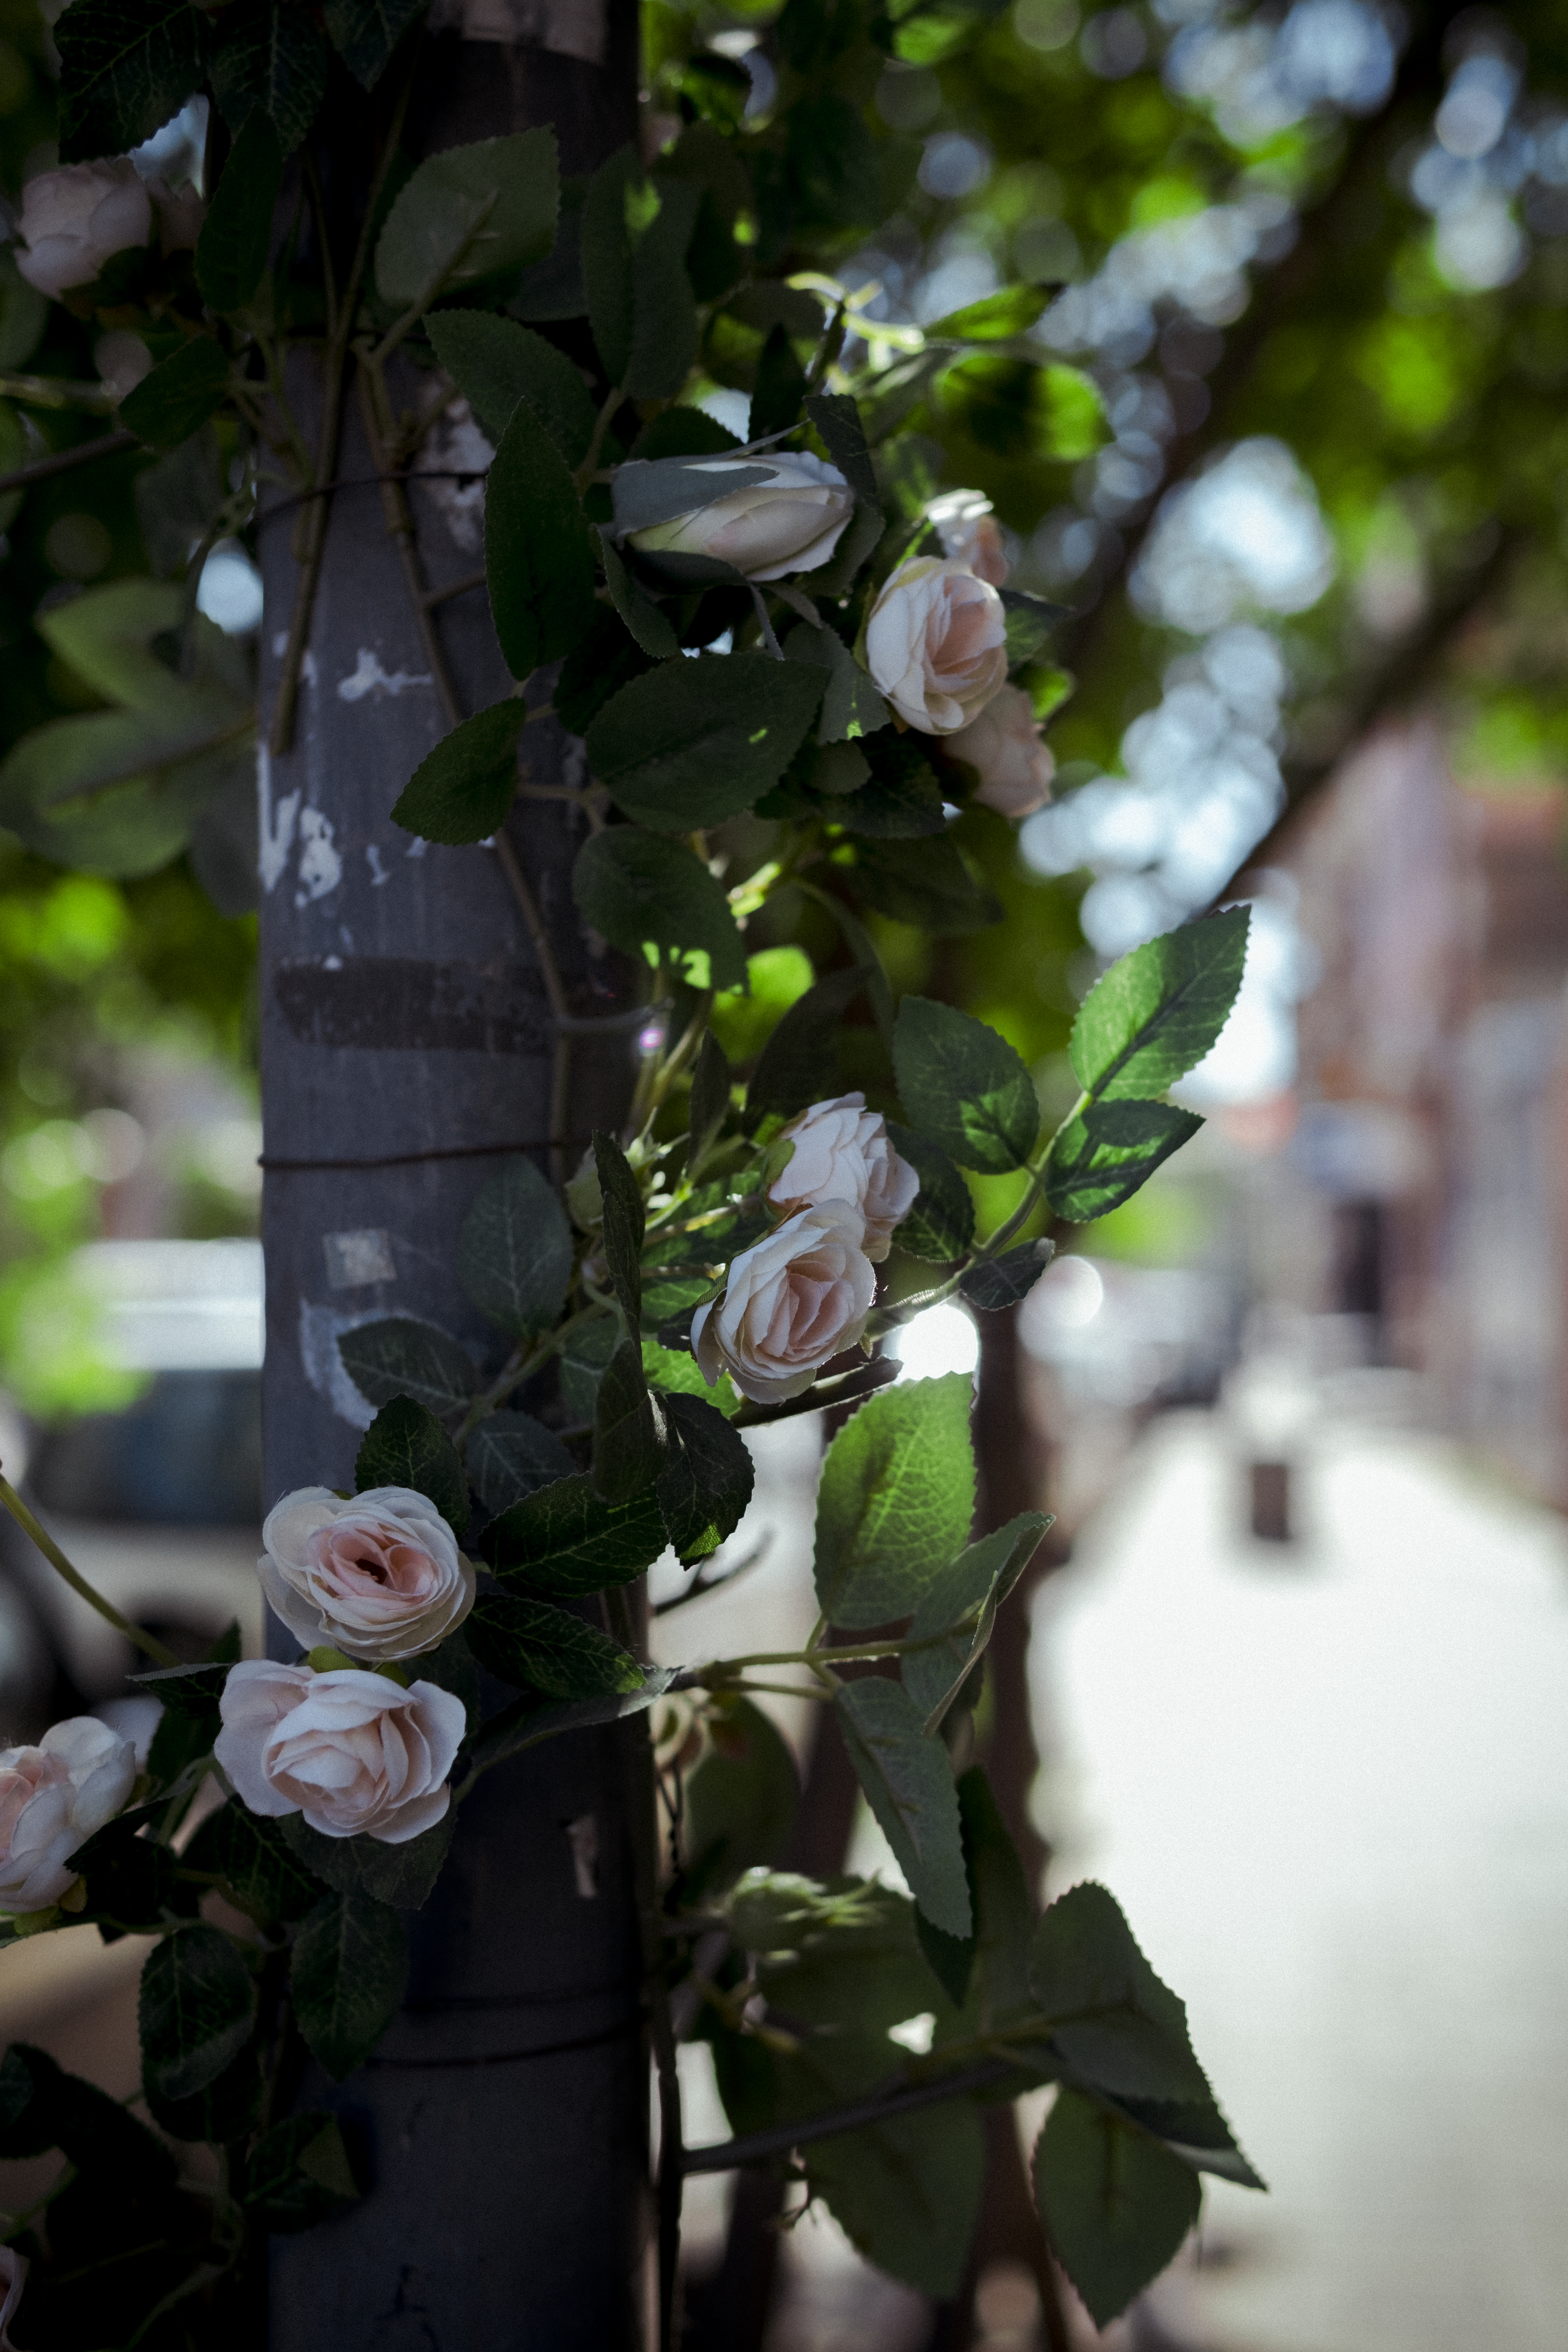 General 4069x6104 photography street leaves flowers rose blurry background bokeh plants outdoors